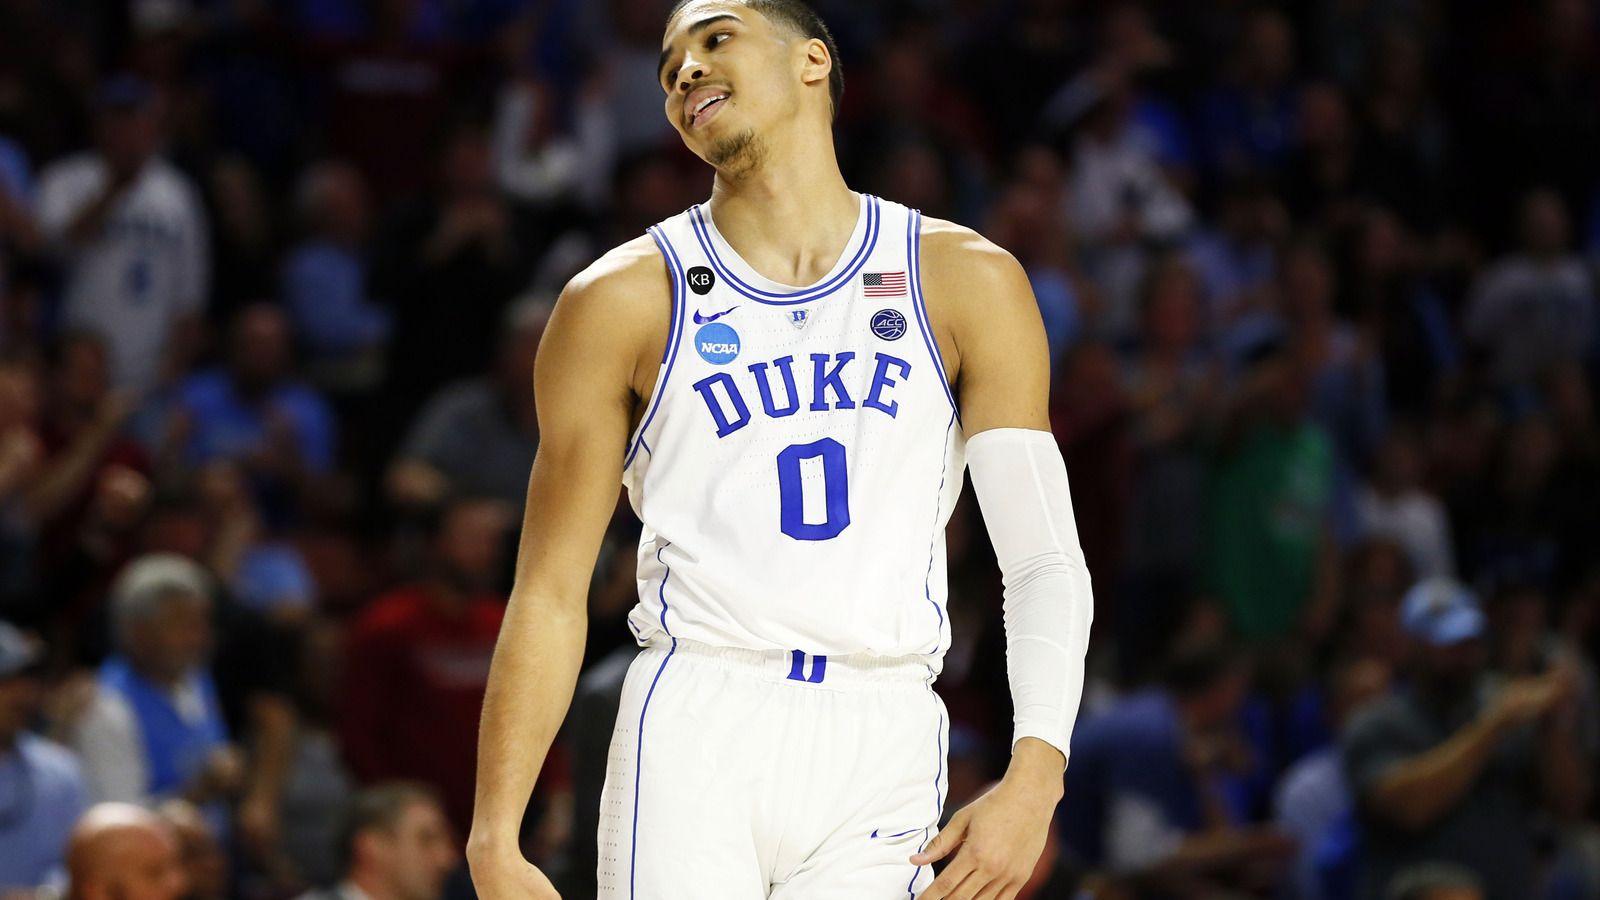 Jayson Tatum Net Worth- How Much Does The 23-year Old NBA Star Earn